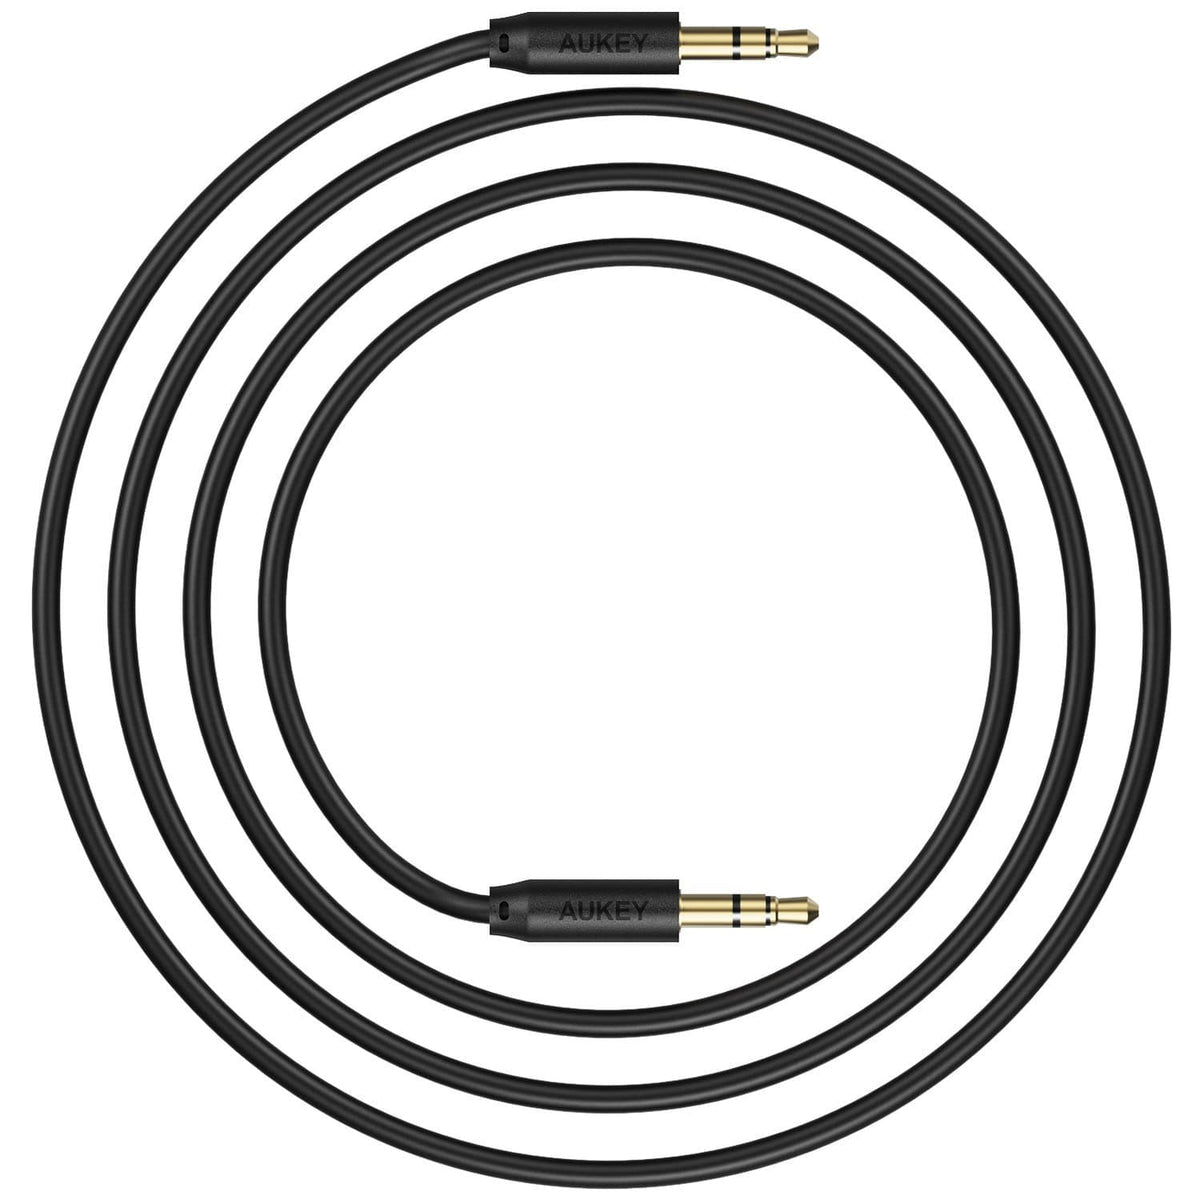 3.5mm to 3.5mm Male Audio Jack Cable (Smartphone Aux Cable)